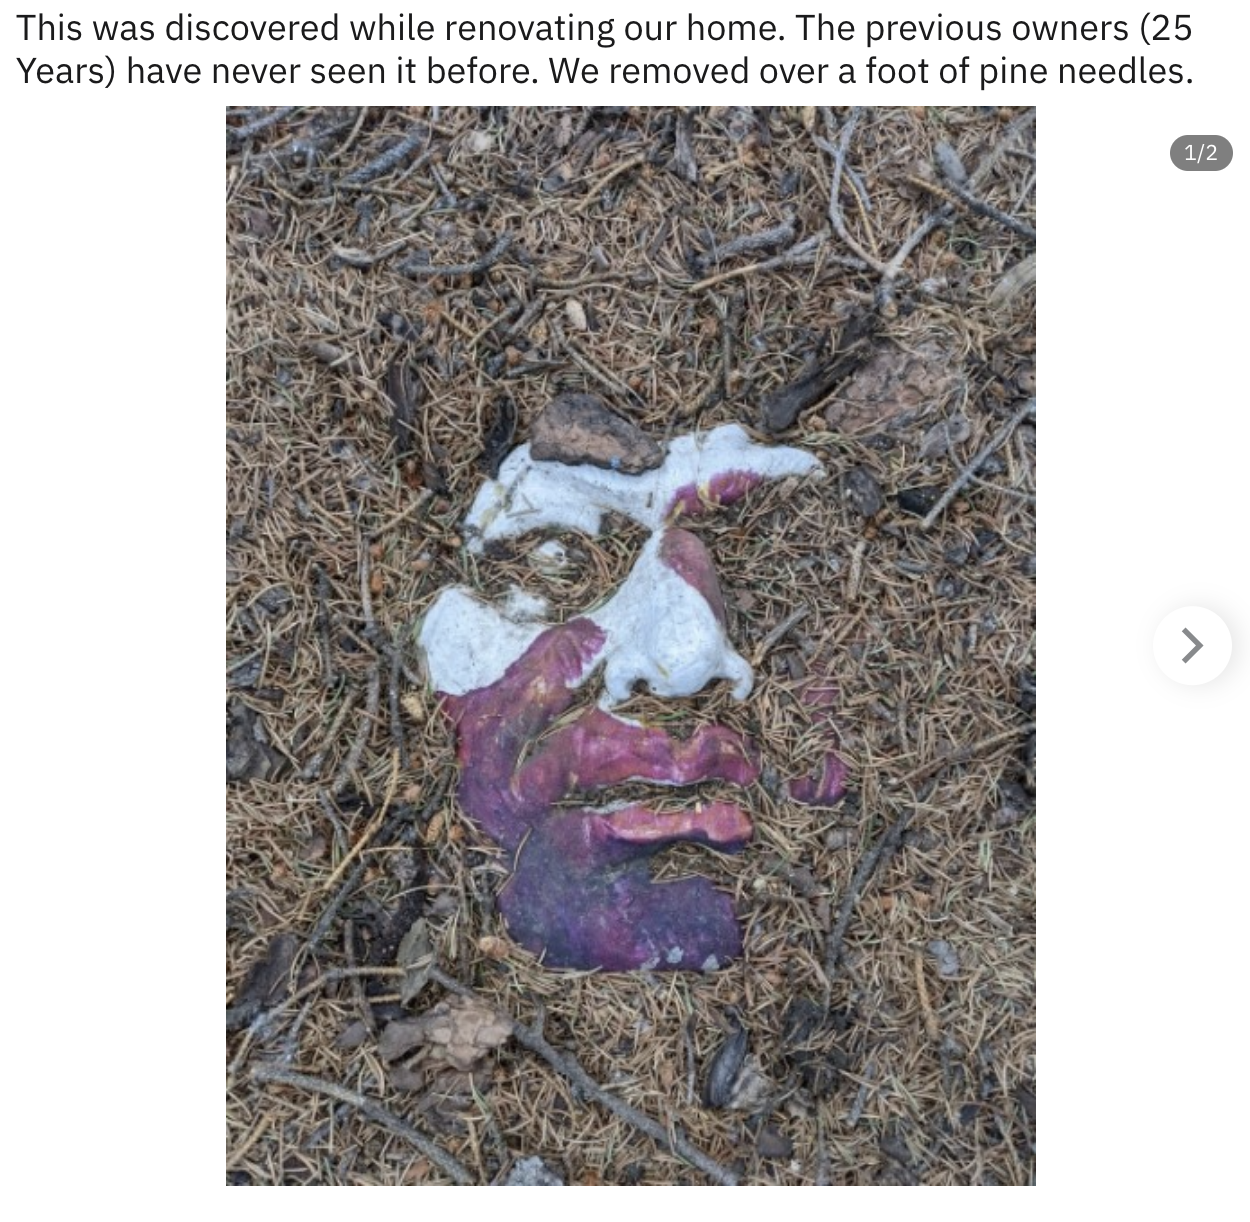 A face partially buried in the ground